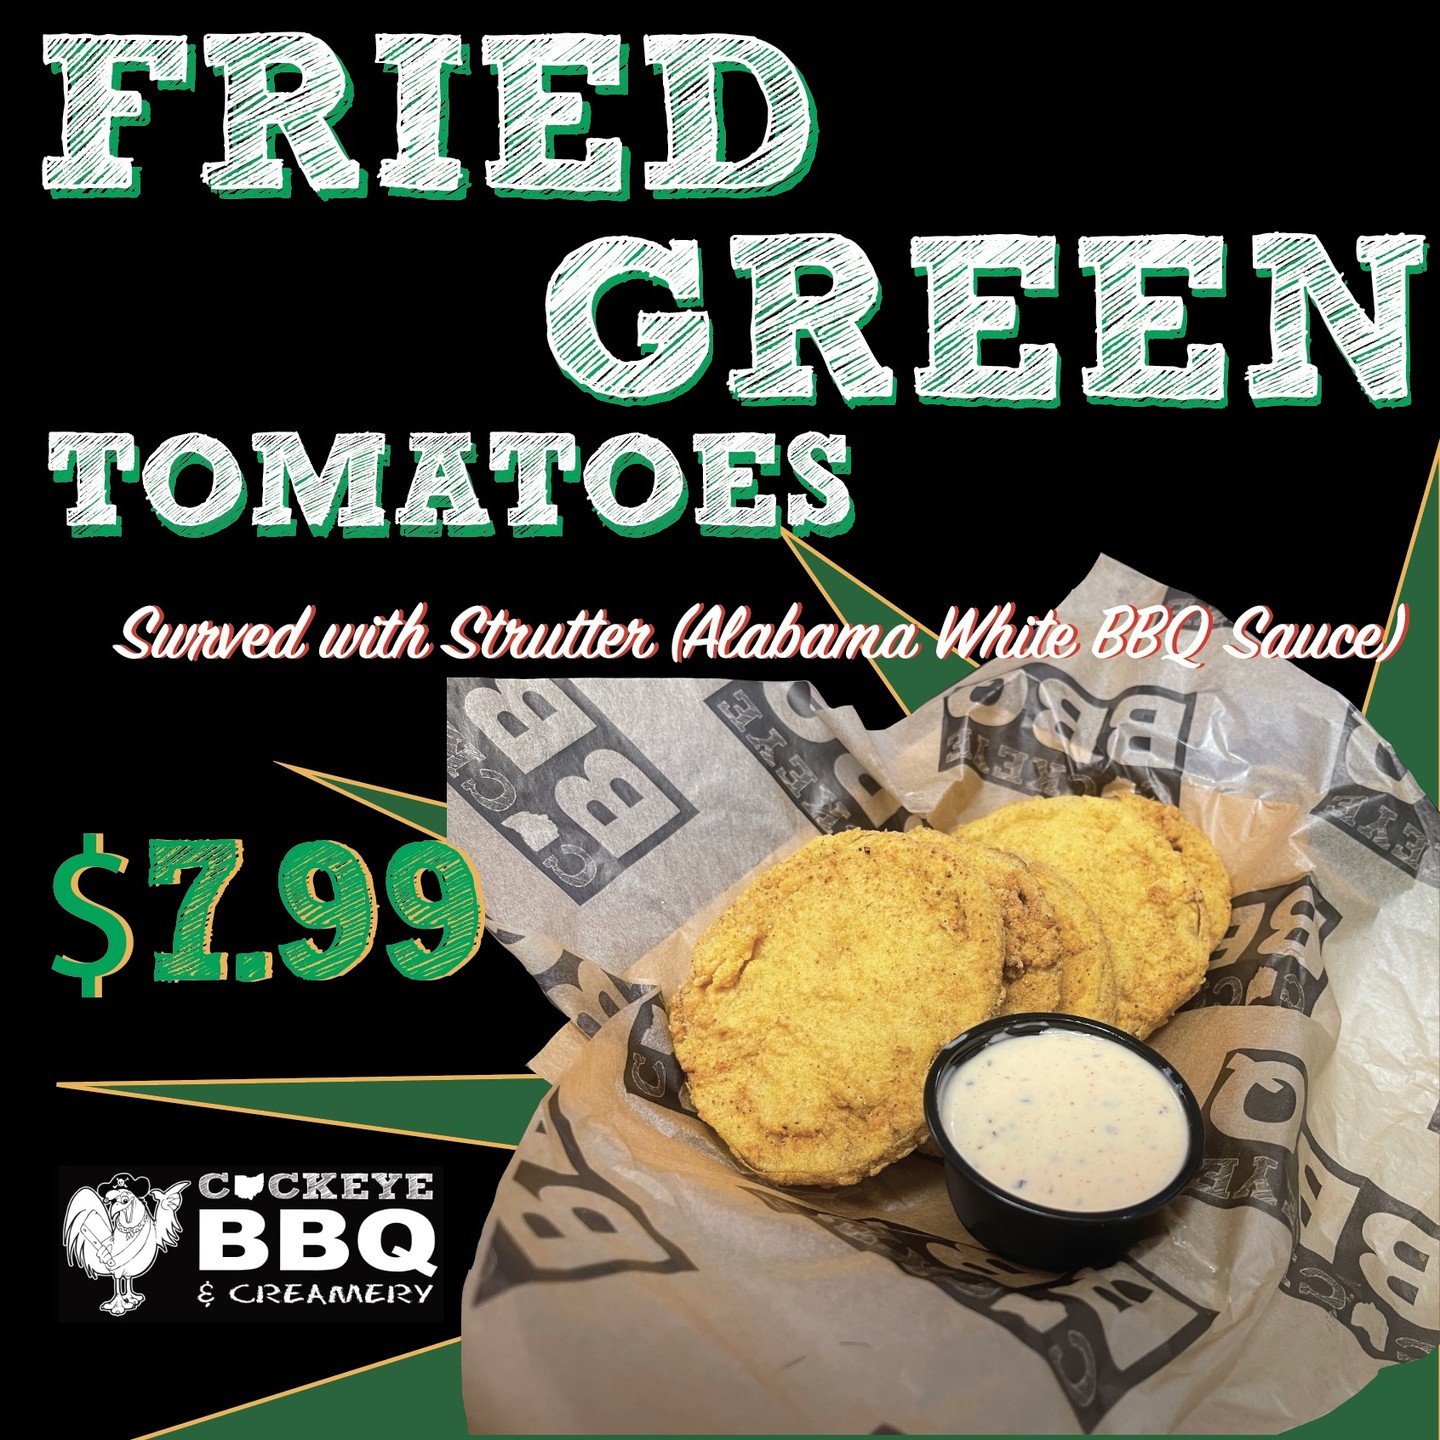 FRIED GREEN TOMATOES! WHAAAAT!
Ladies and gentleman it's that time again. Green tomatoes are back in season. We dip ours in buttermilk and seasoned cornflour. Fried Fresh to order and served with Strutter (Alabama White BBQ Sauce.) 
#morethanenough #